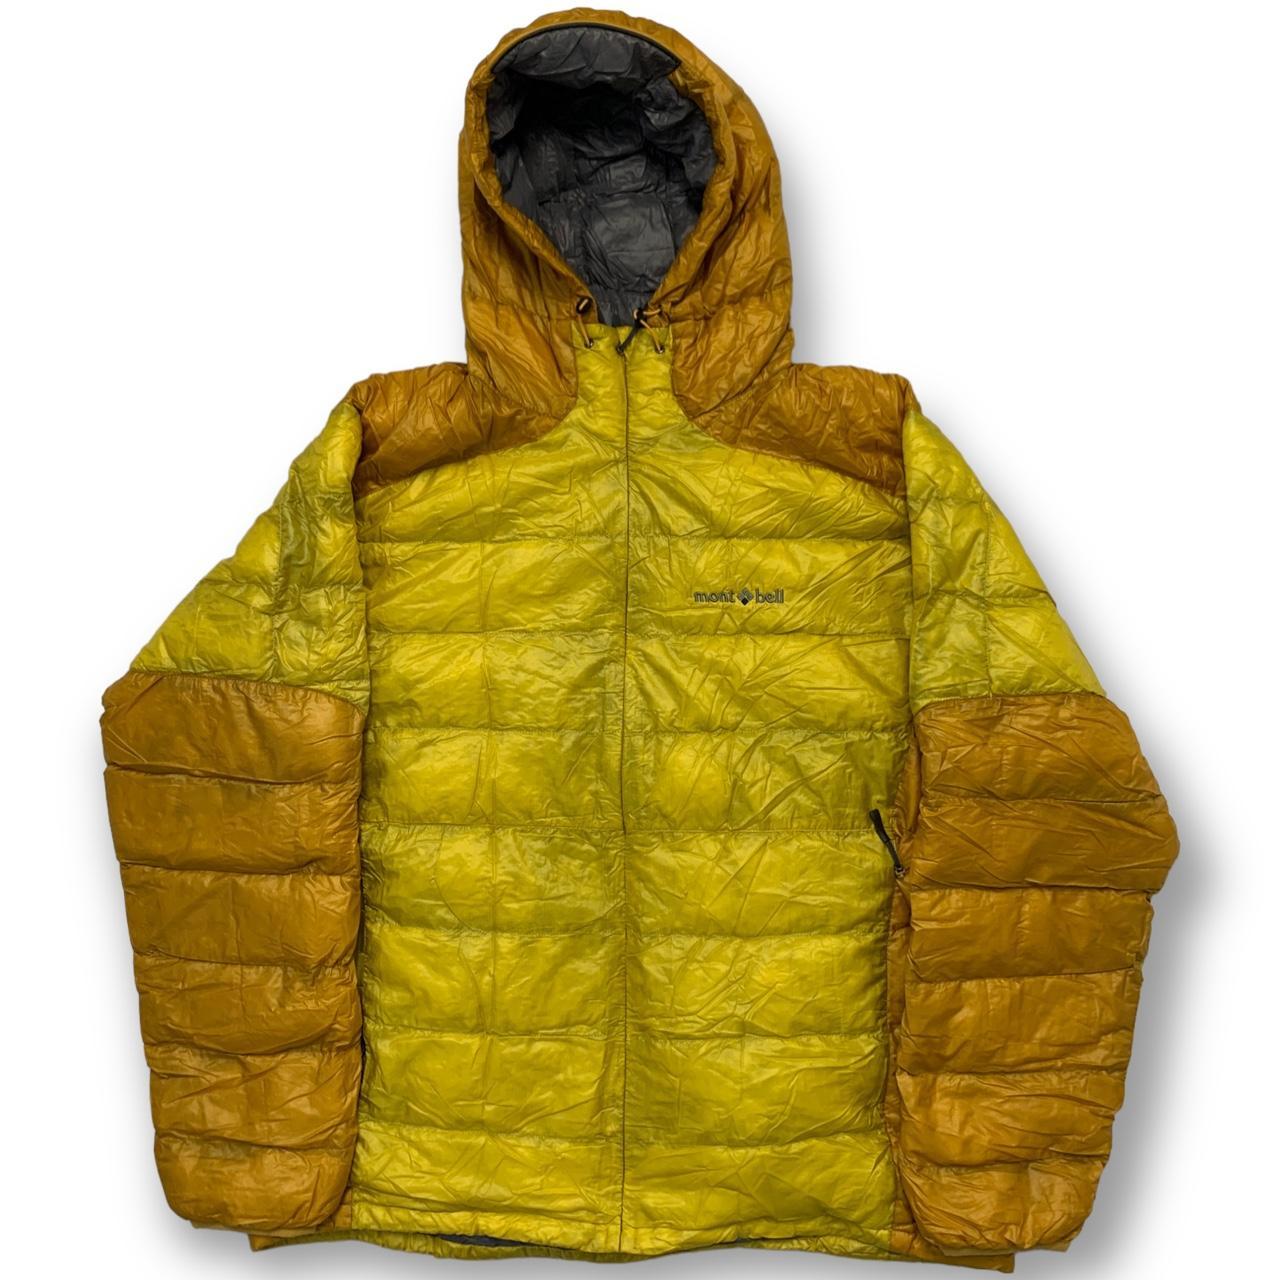 Montbell Puffer Size XL Yellow two toned montbell... - Depop